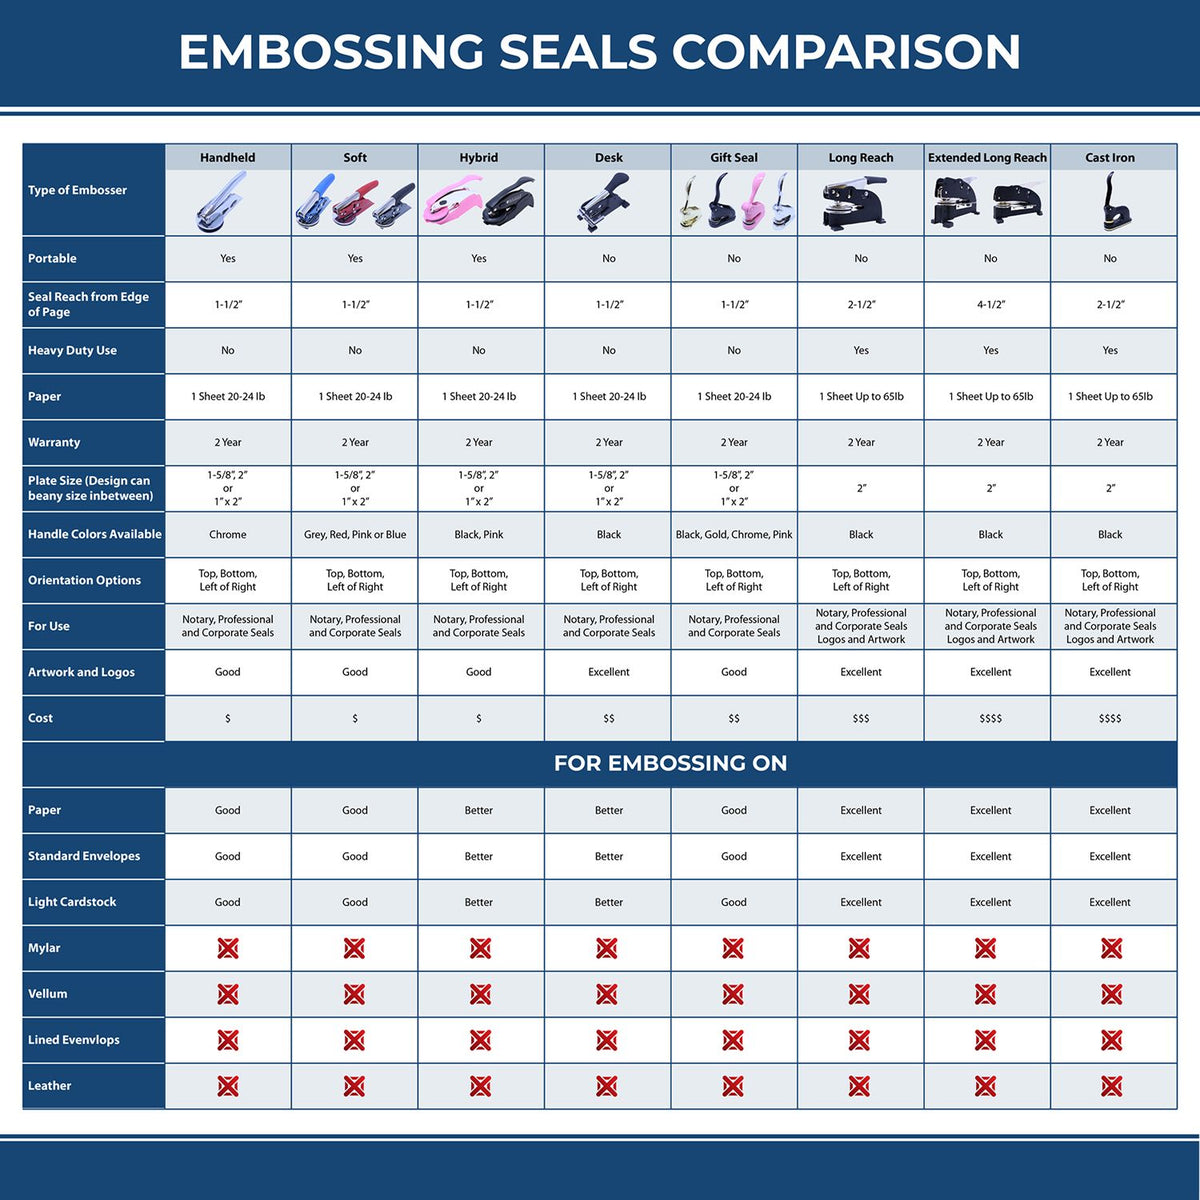 A comparison chart for the different types of mount models available for the Heavy Duty Cast Iron Wisconsin Geologist Seal Embosser